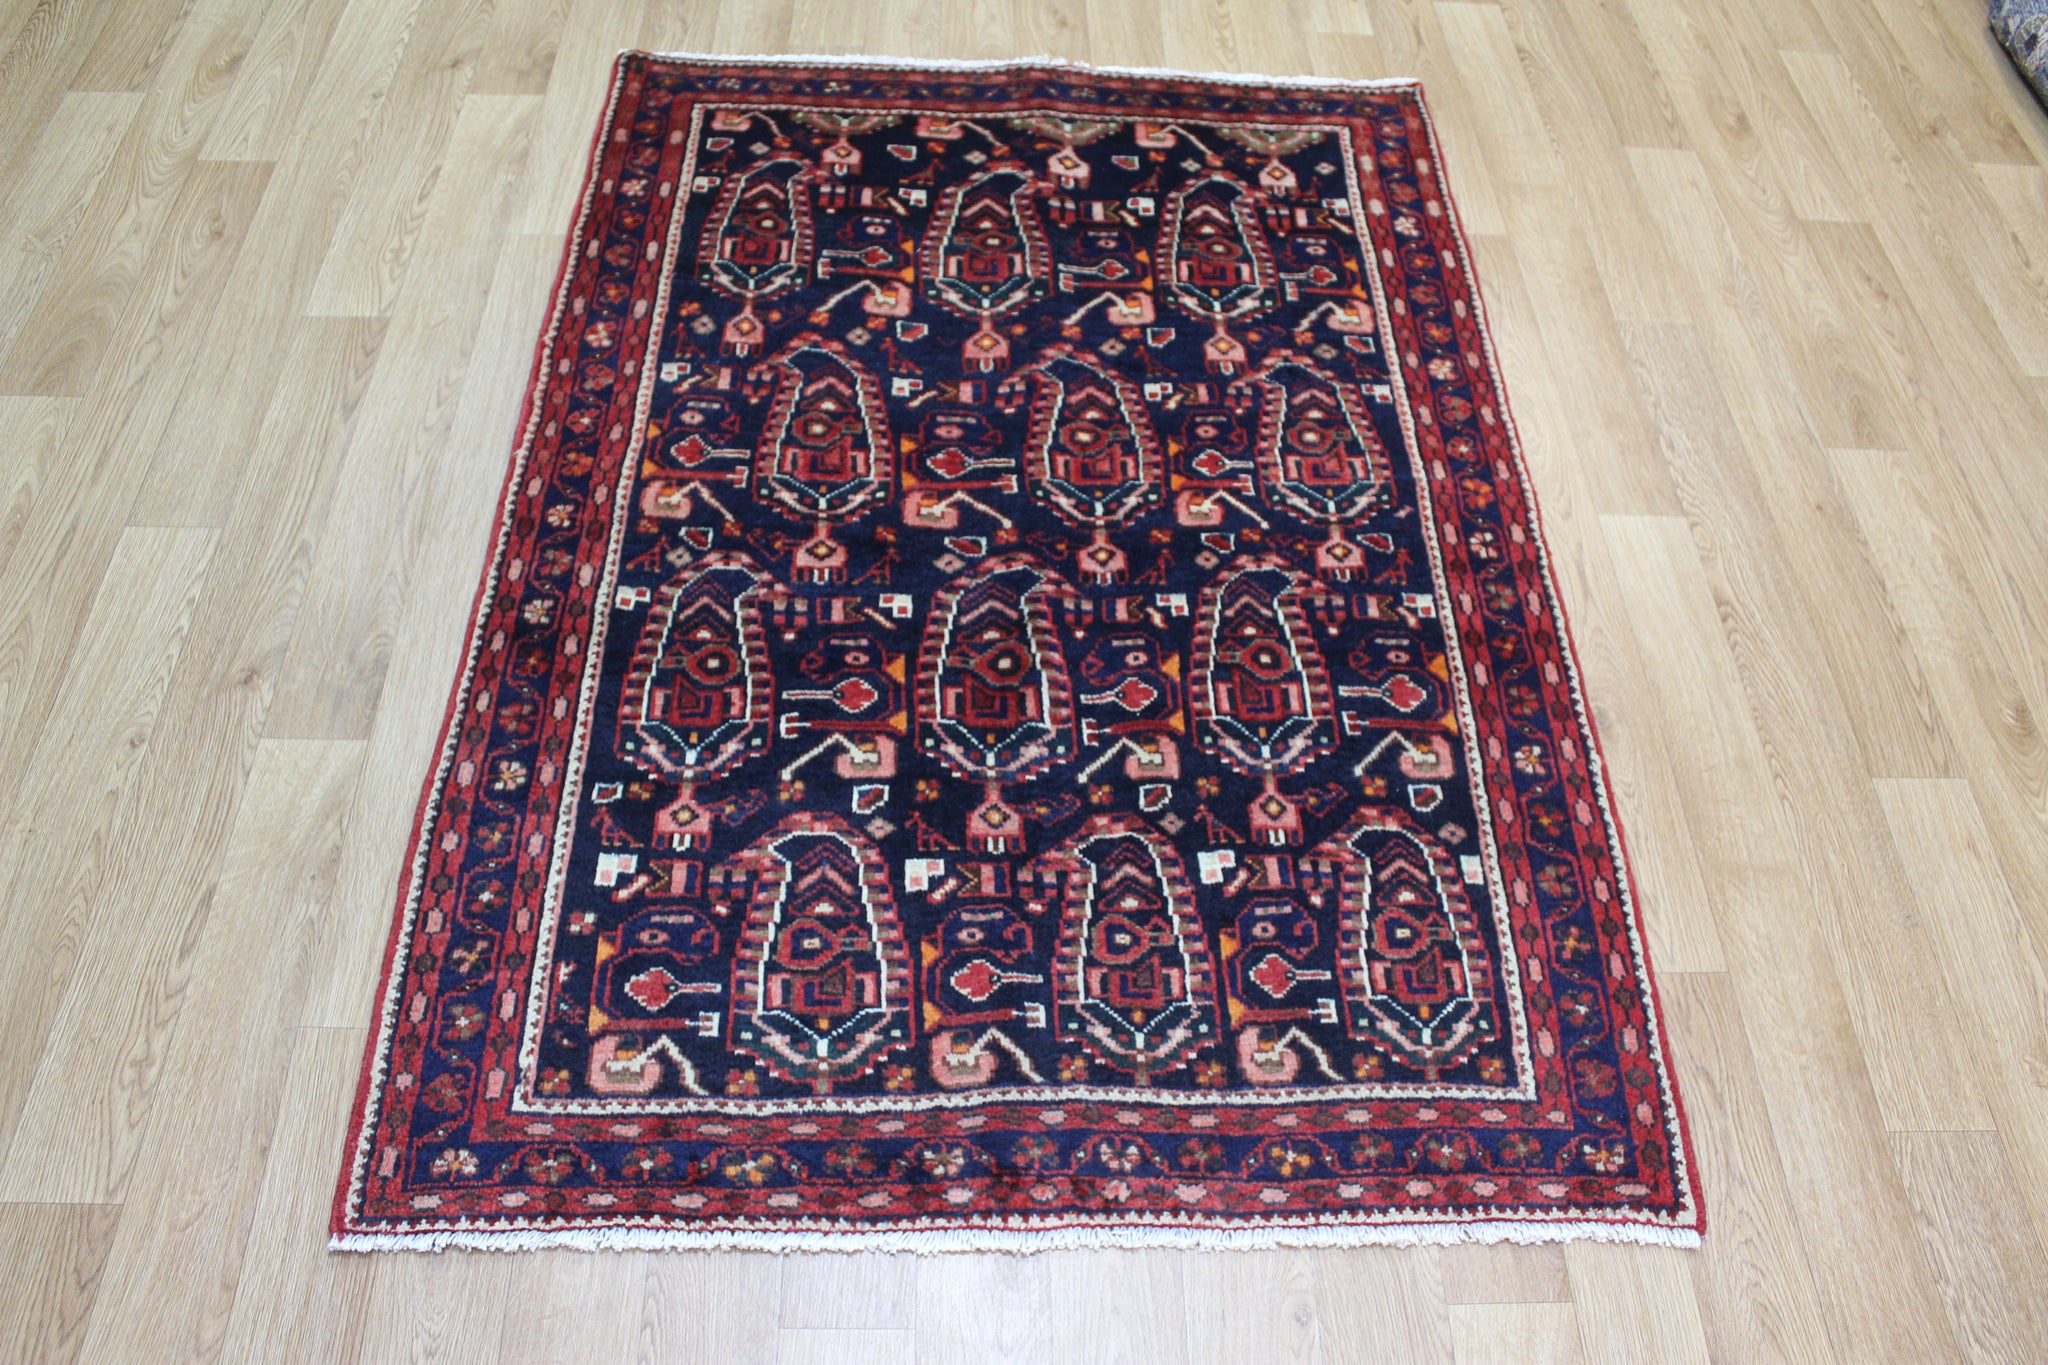 VINTAGE PERSIAN BALUCH RUG WITH BOTEH DESIGN 155 X 105 CM